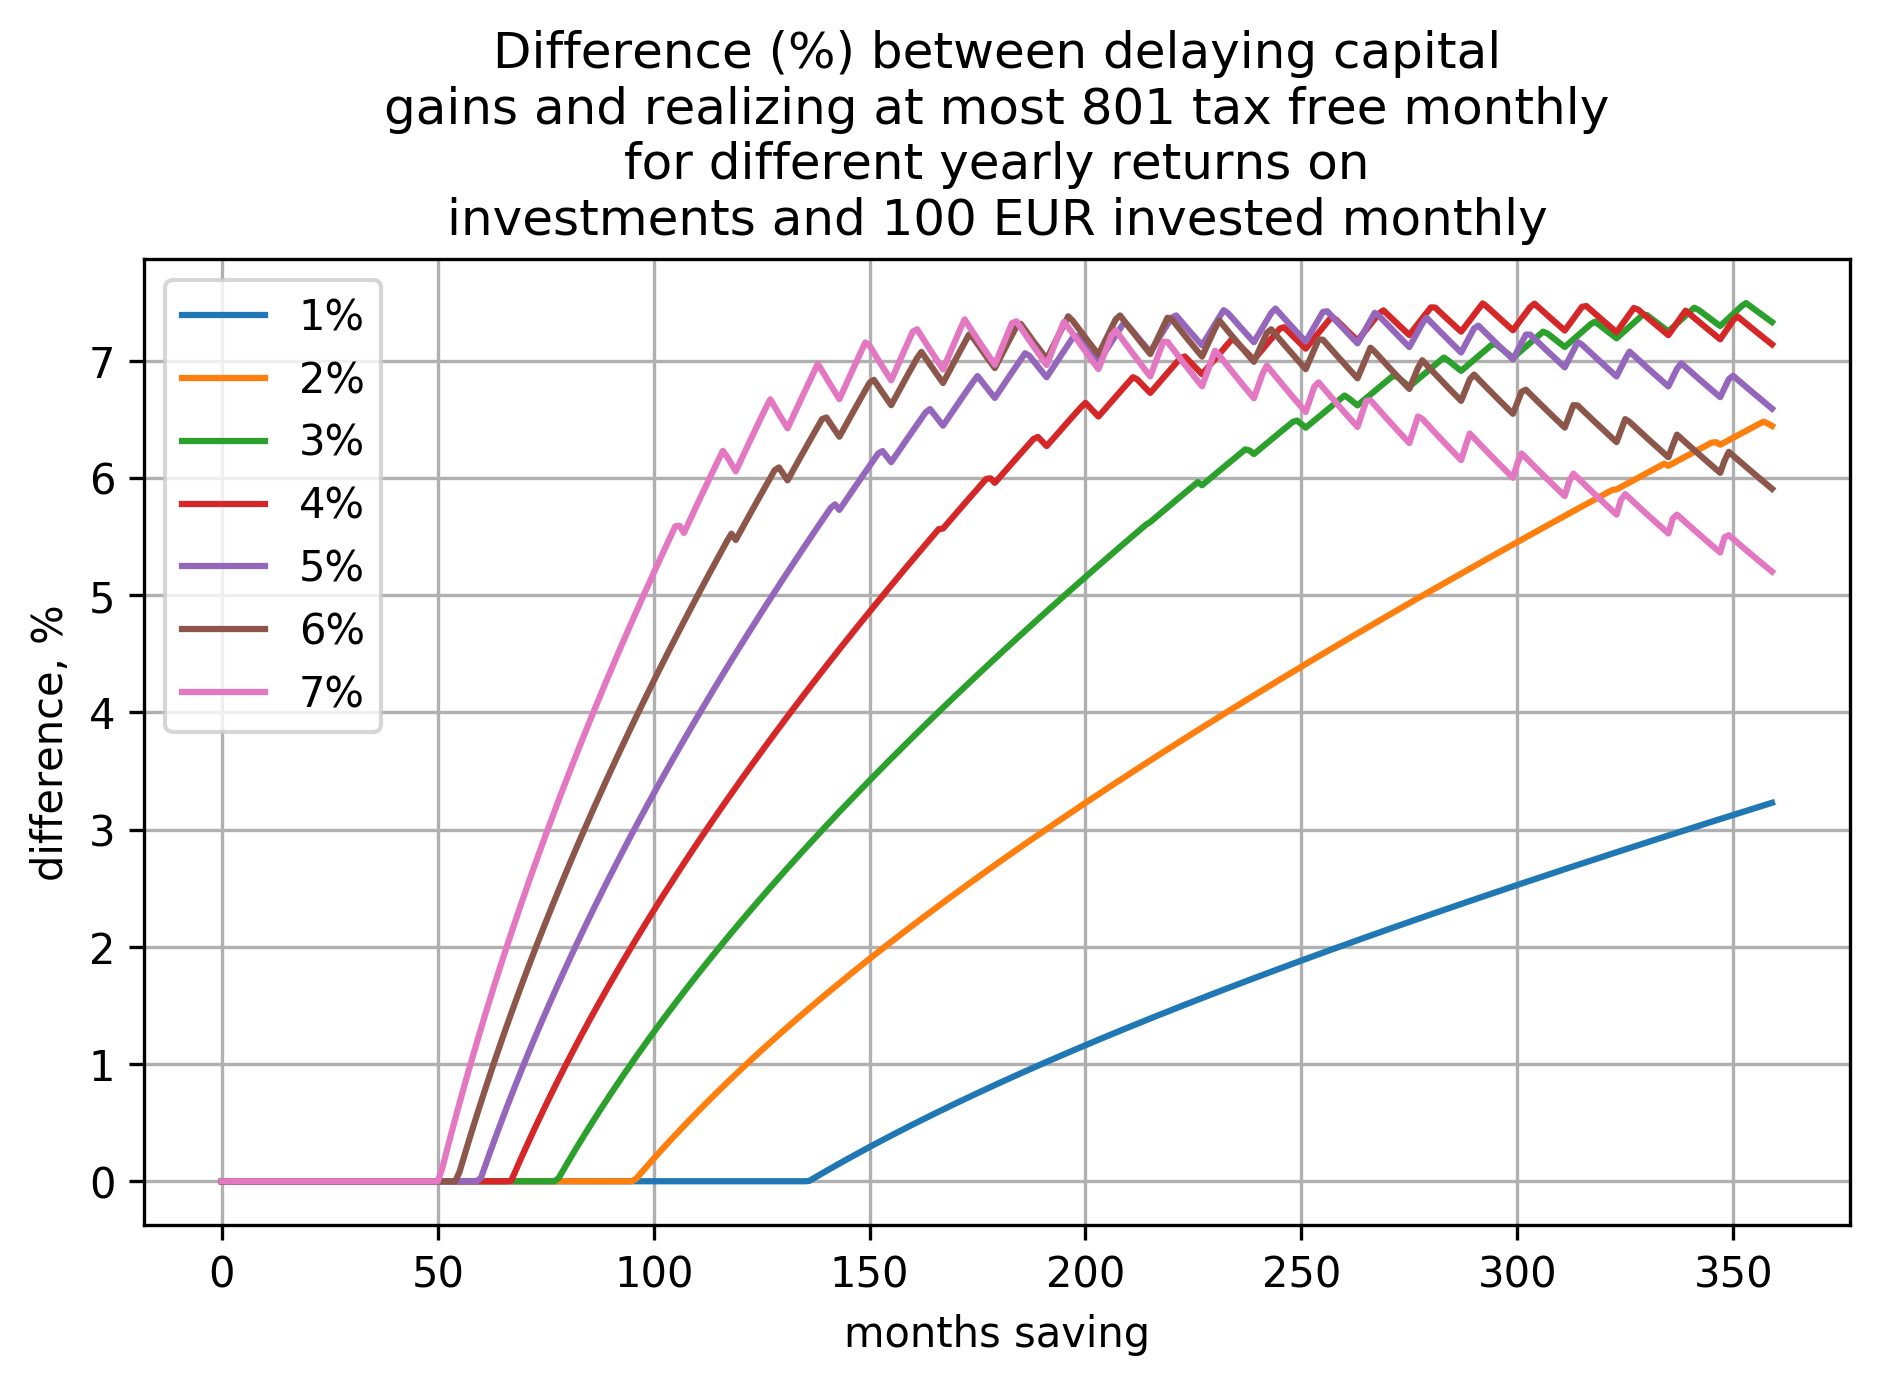 a plot showing how difference (in percents) between the two cases (delaying capital gains and
realizing at most 801€ tax free yearly) depends on time saving and yearly return on
investment when investing 100€ per month